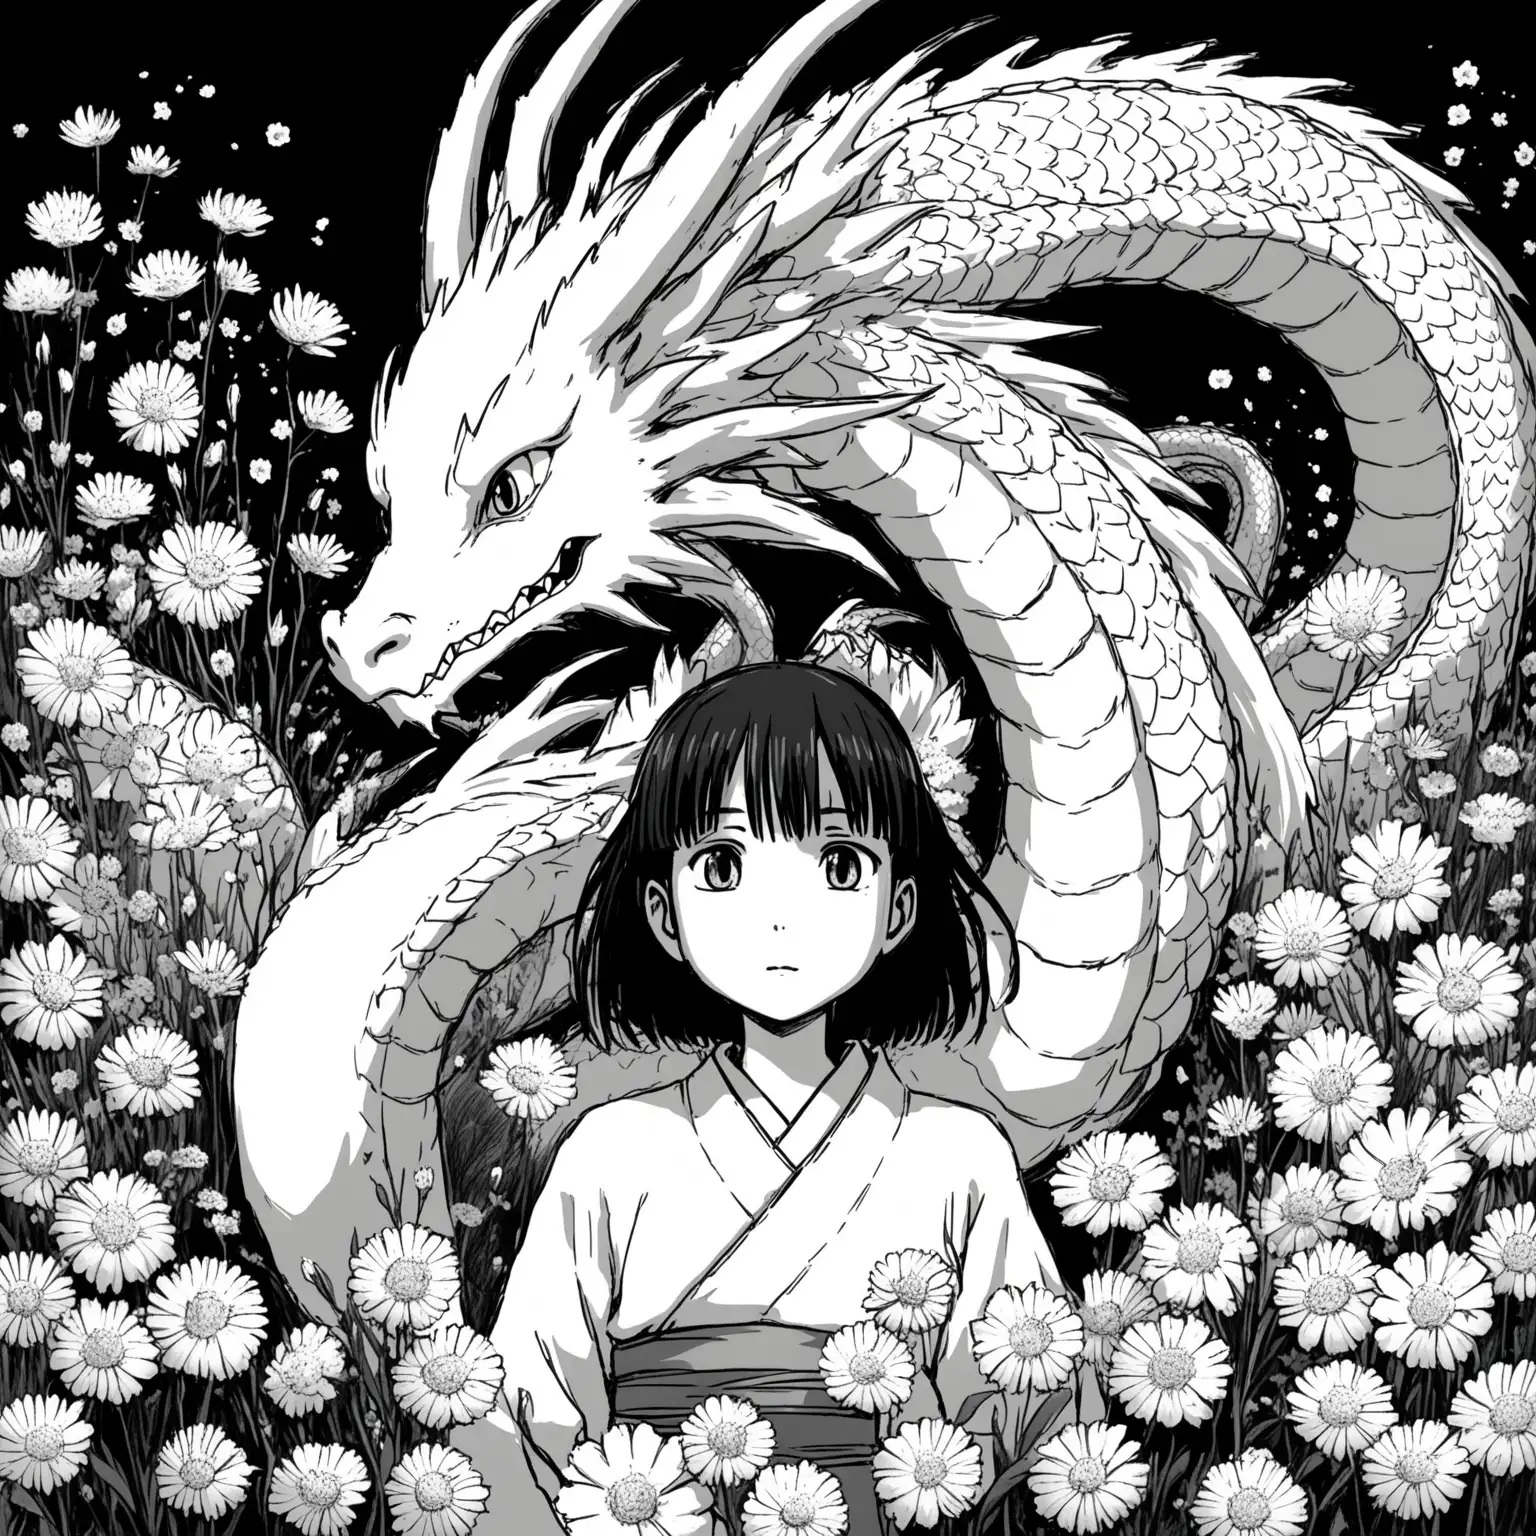 Mystical Dragon Inspired by Haku from Spirited Away amidst Black and White Flora